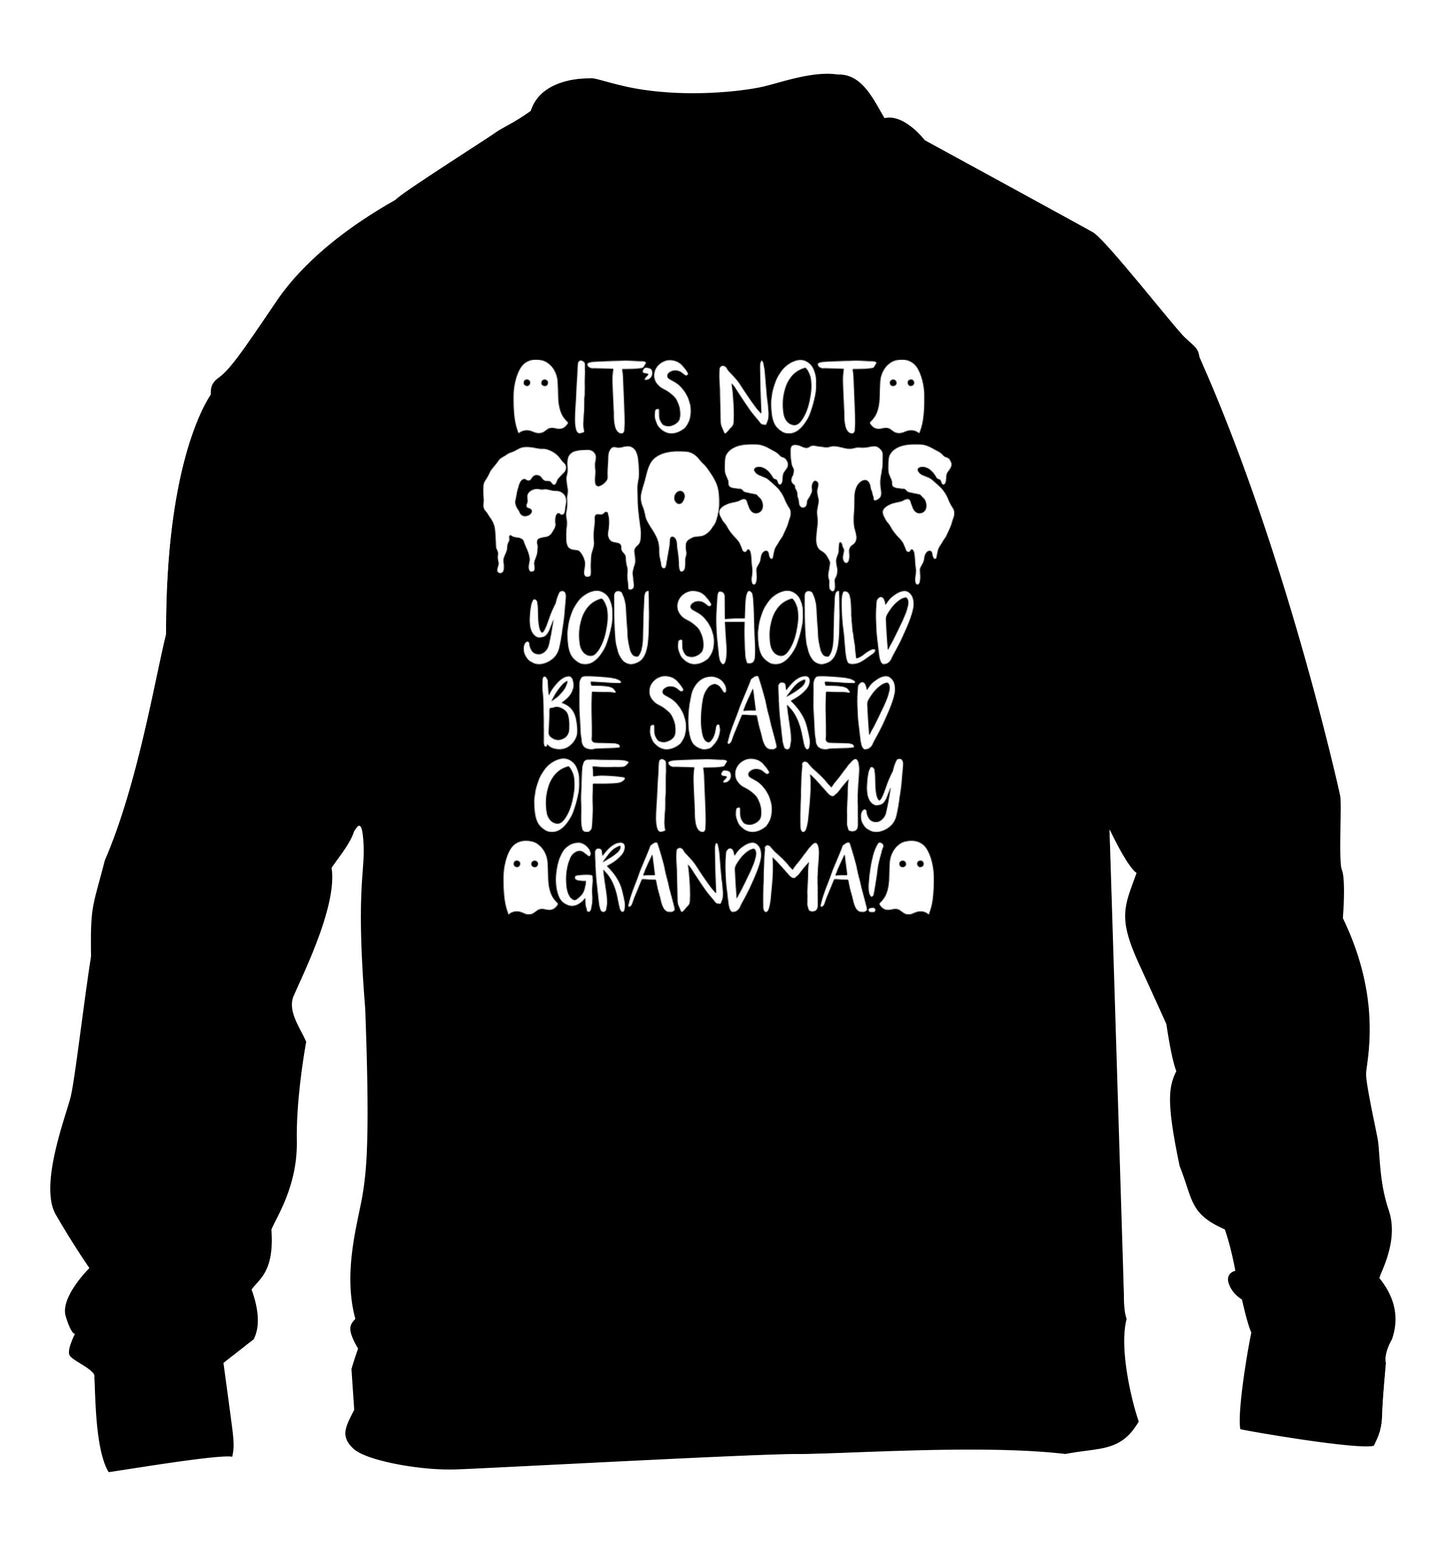 It's not ghosts you should be scared of it's my grandma! children's black sweater 12-14 Years